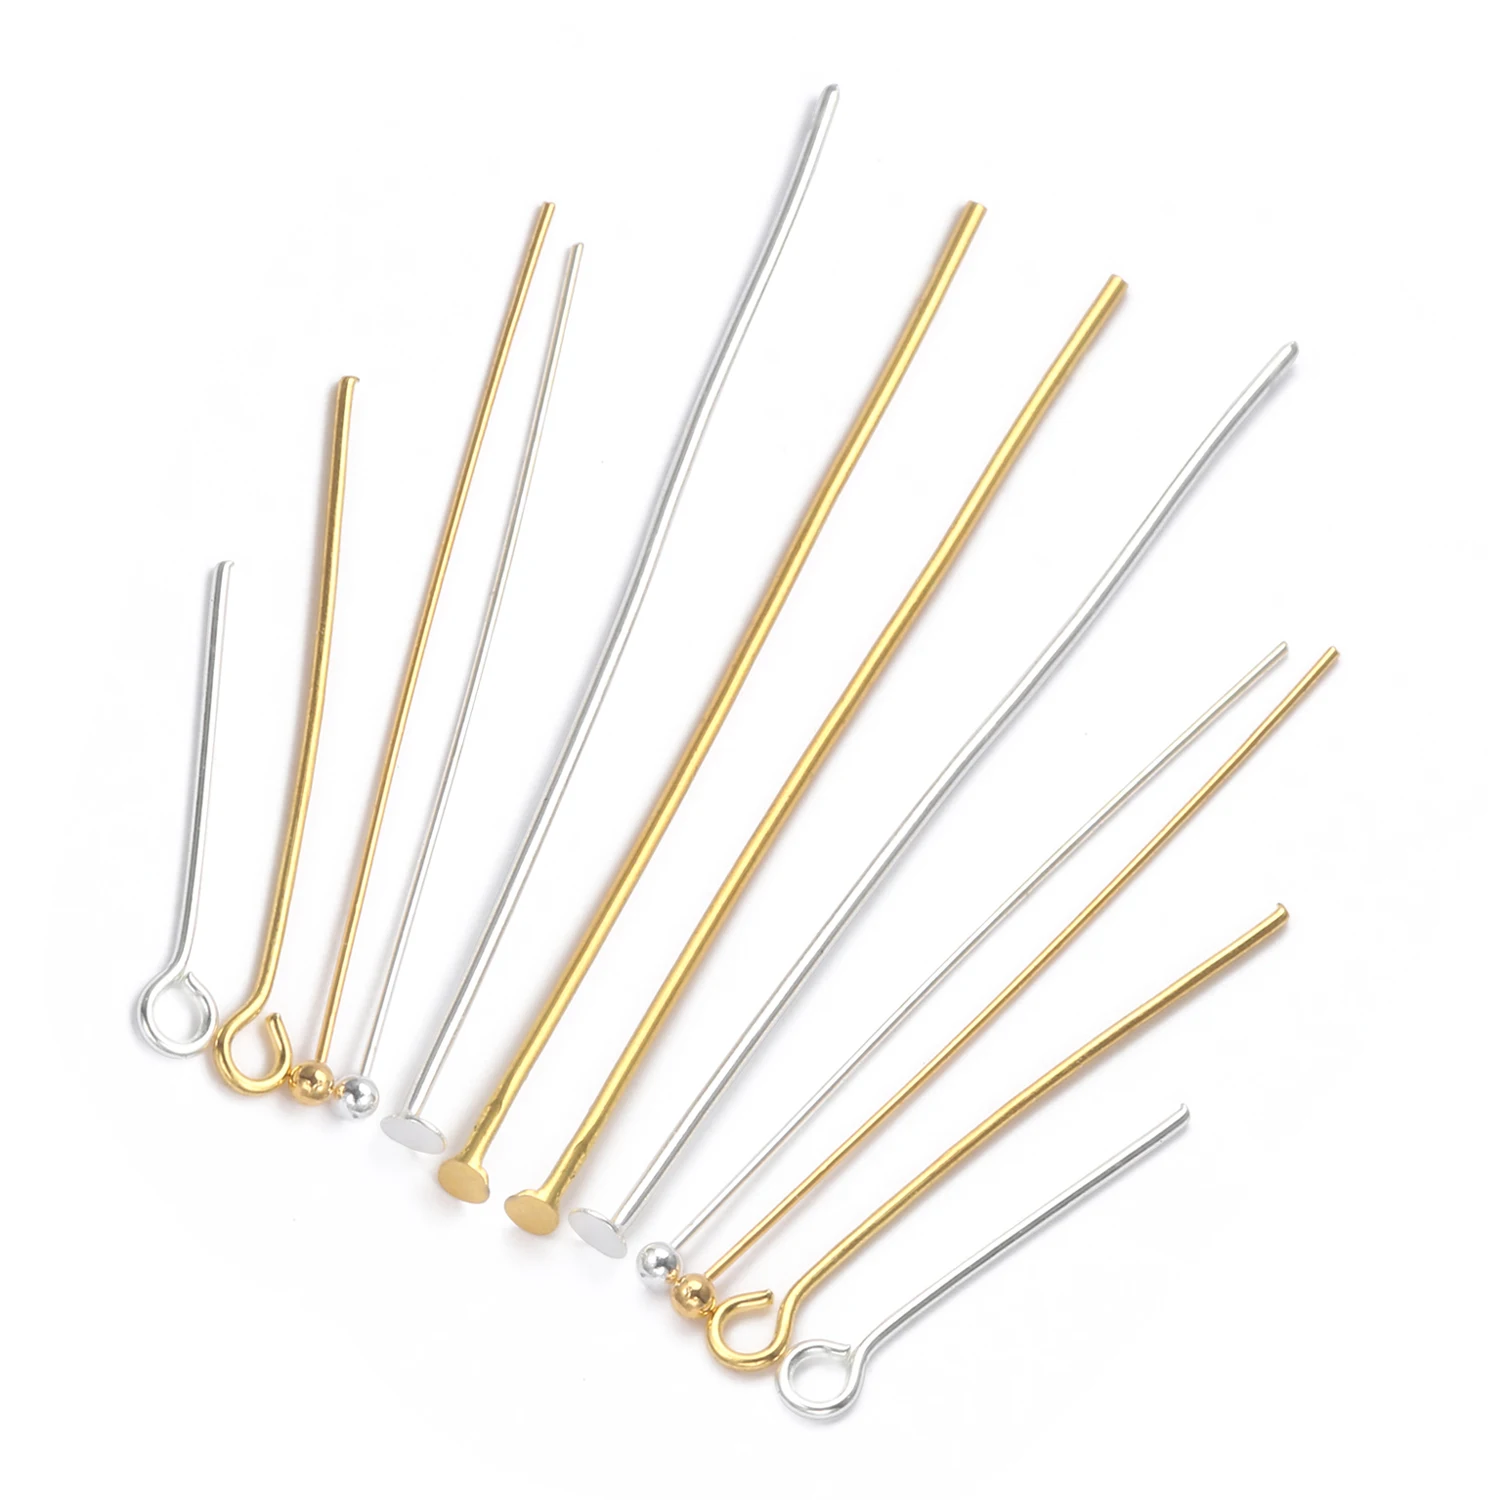 for Jewelry Beading Craft Making CF156-18 200pcs Top Quality Silver Flat Head Pins 18mm wire~21GA 